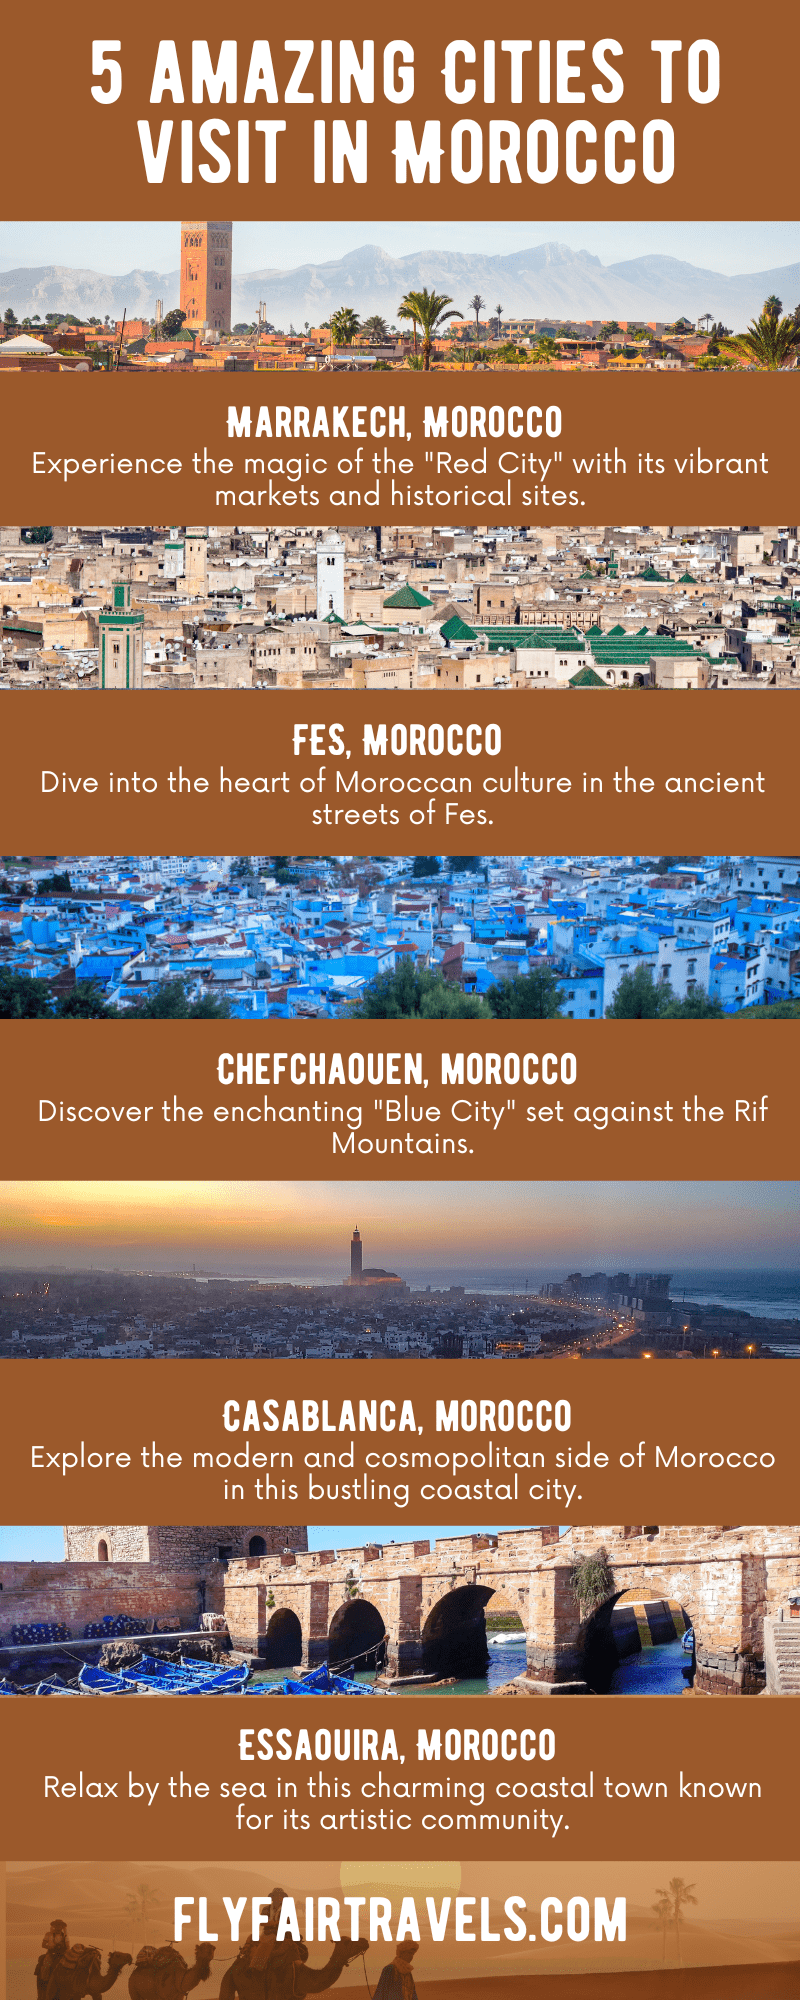 Top_Cities_in_Morocco_Infographic